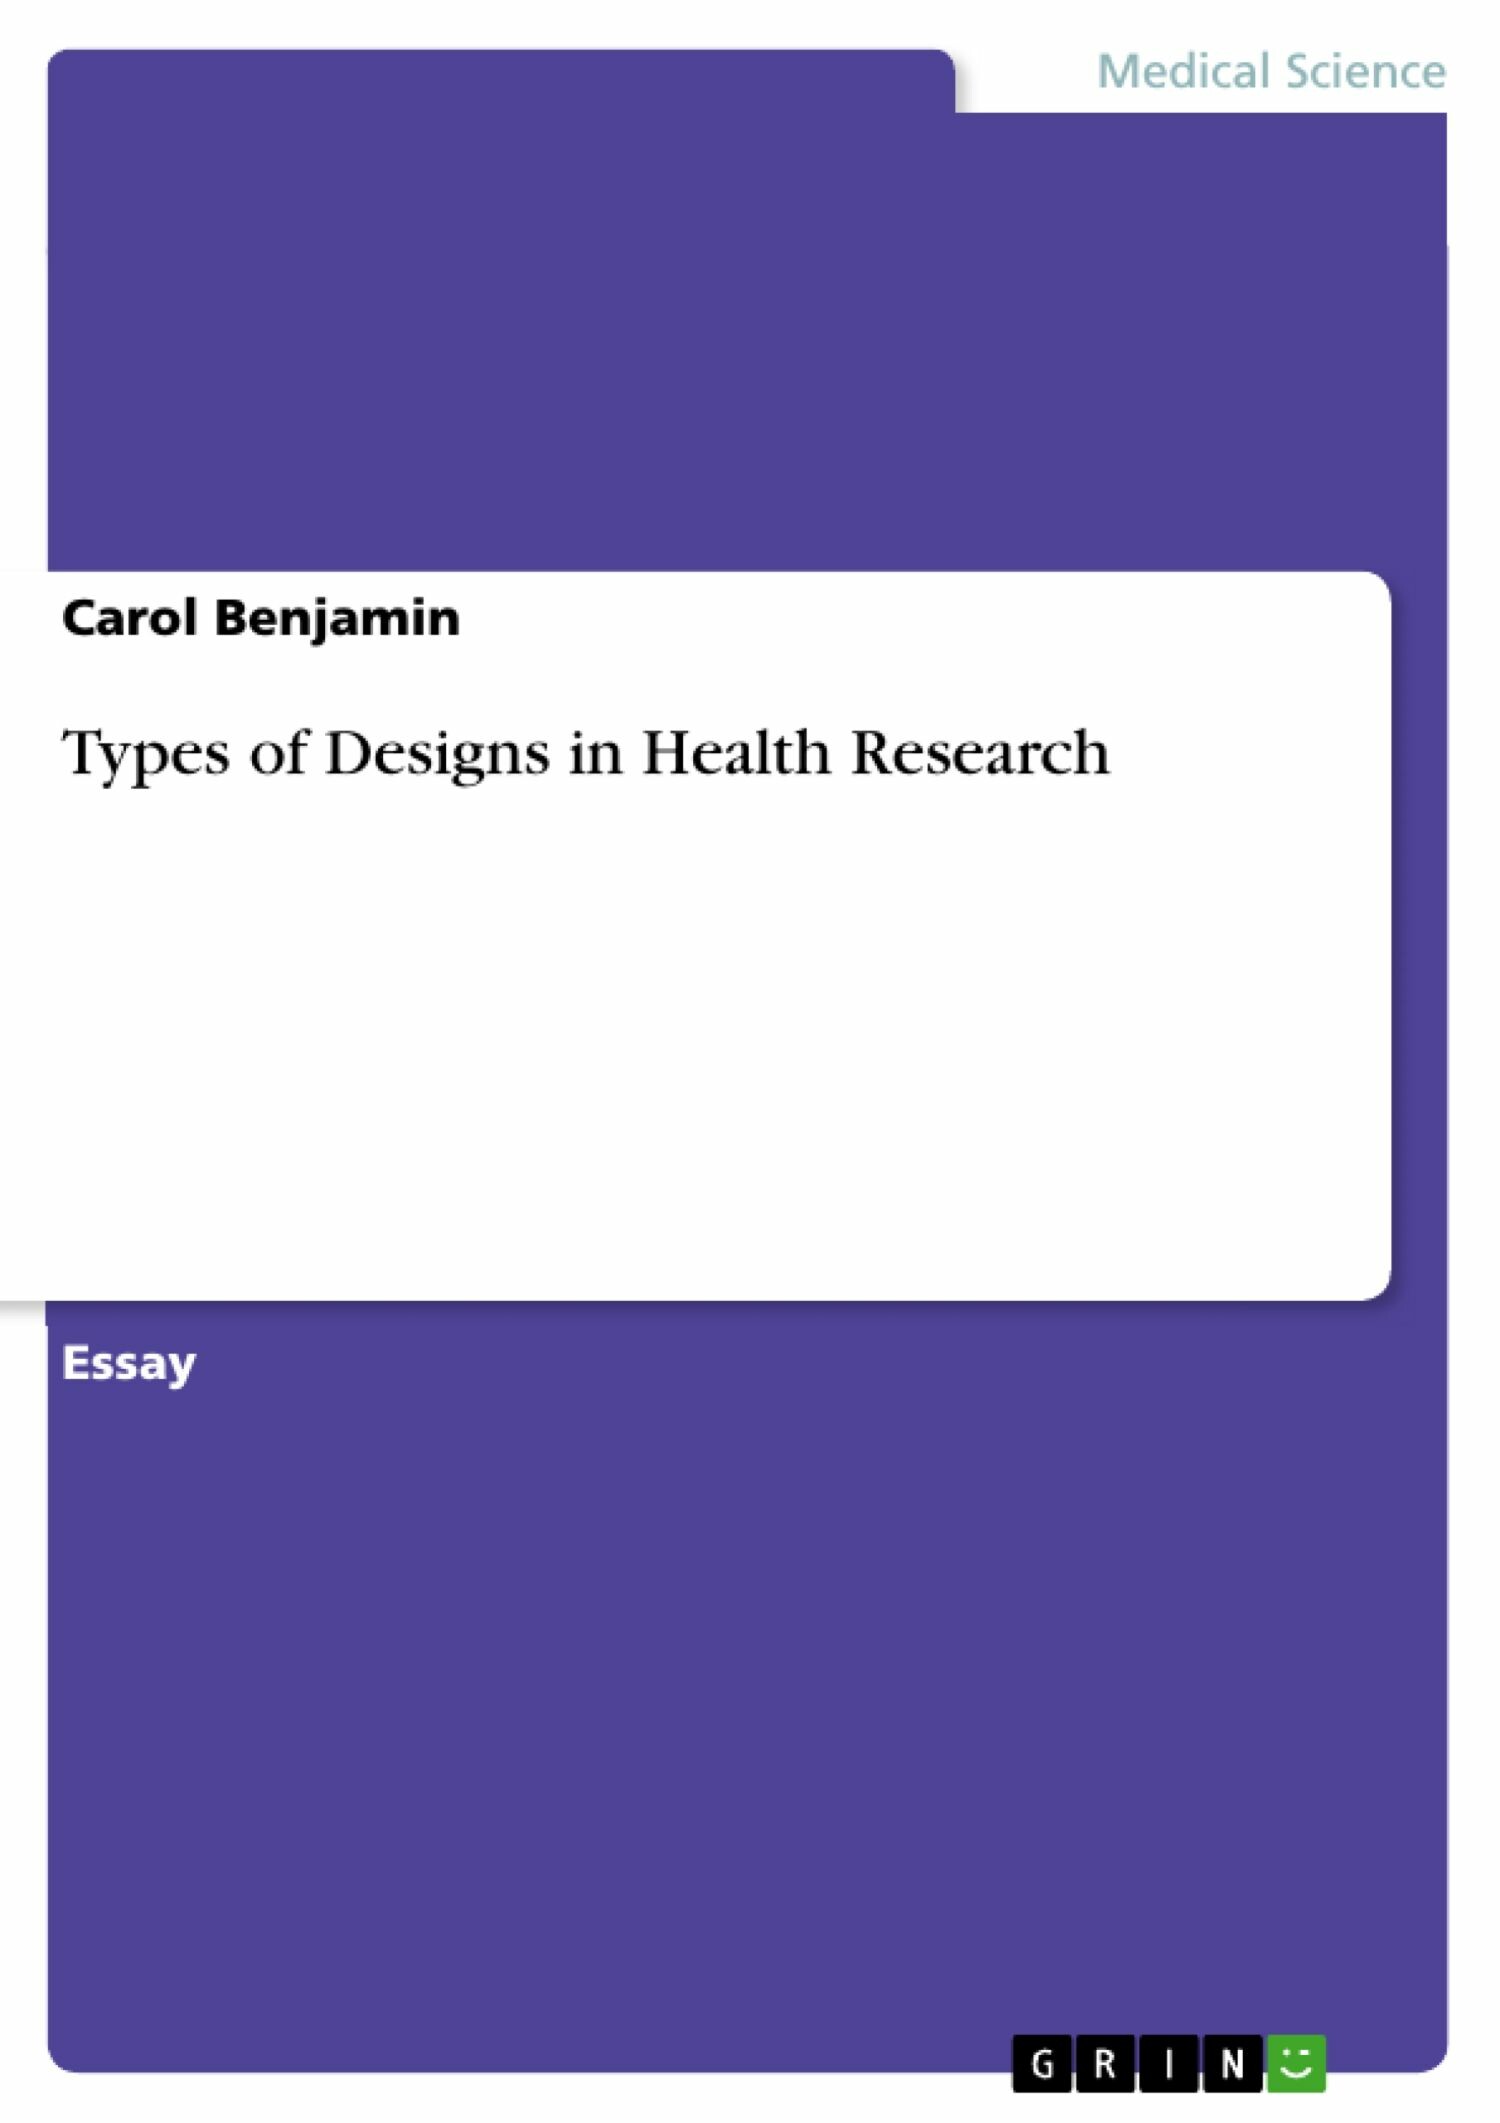 Types of Designs in Health Research